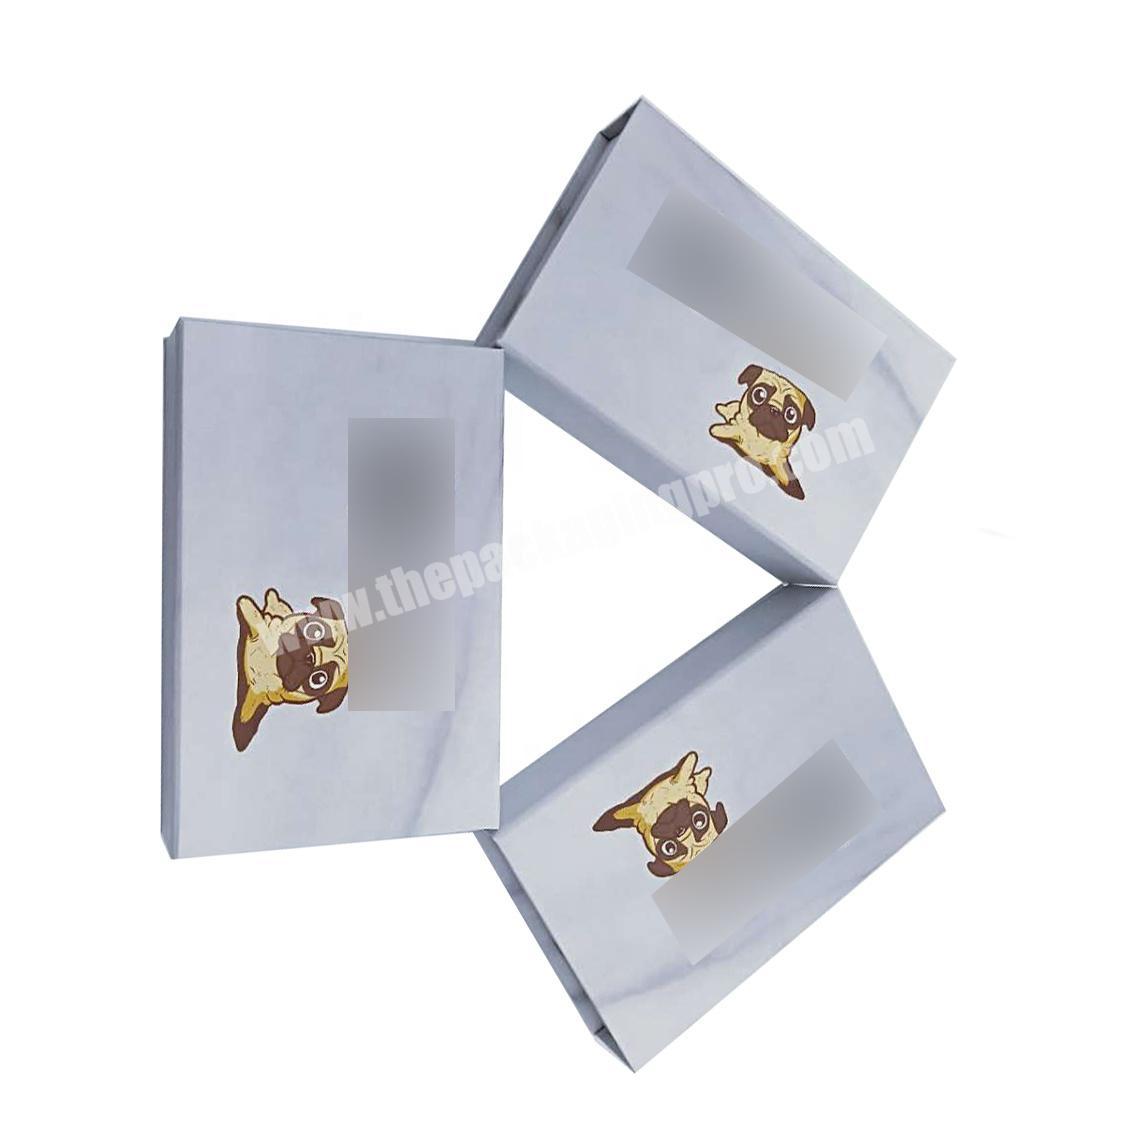 Souvenir magnetic customised notebooks small cardboard boxes withmagnetic lids rigid box